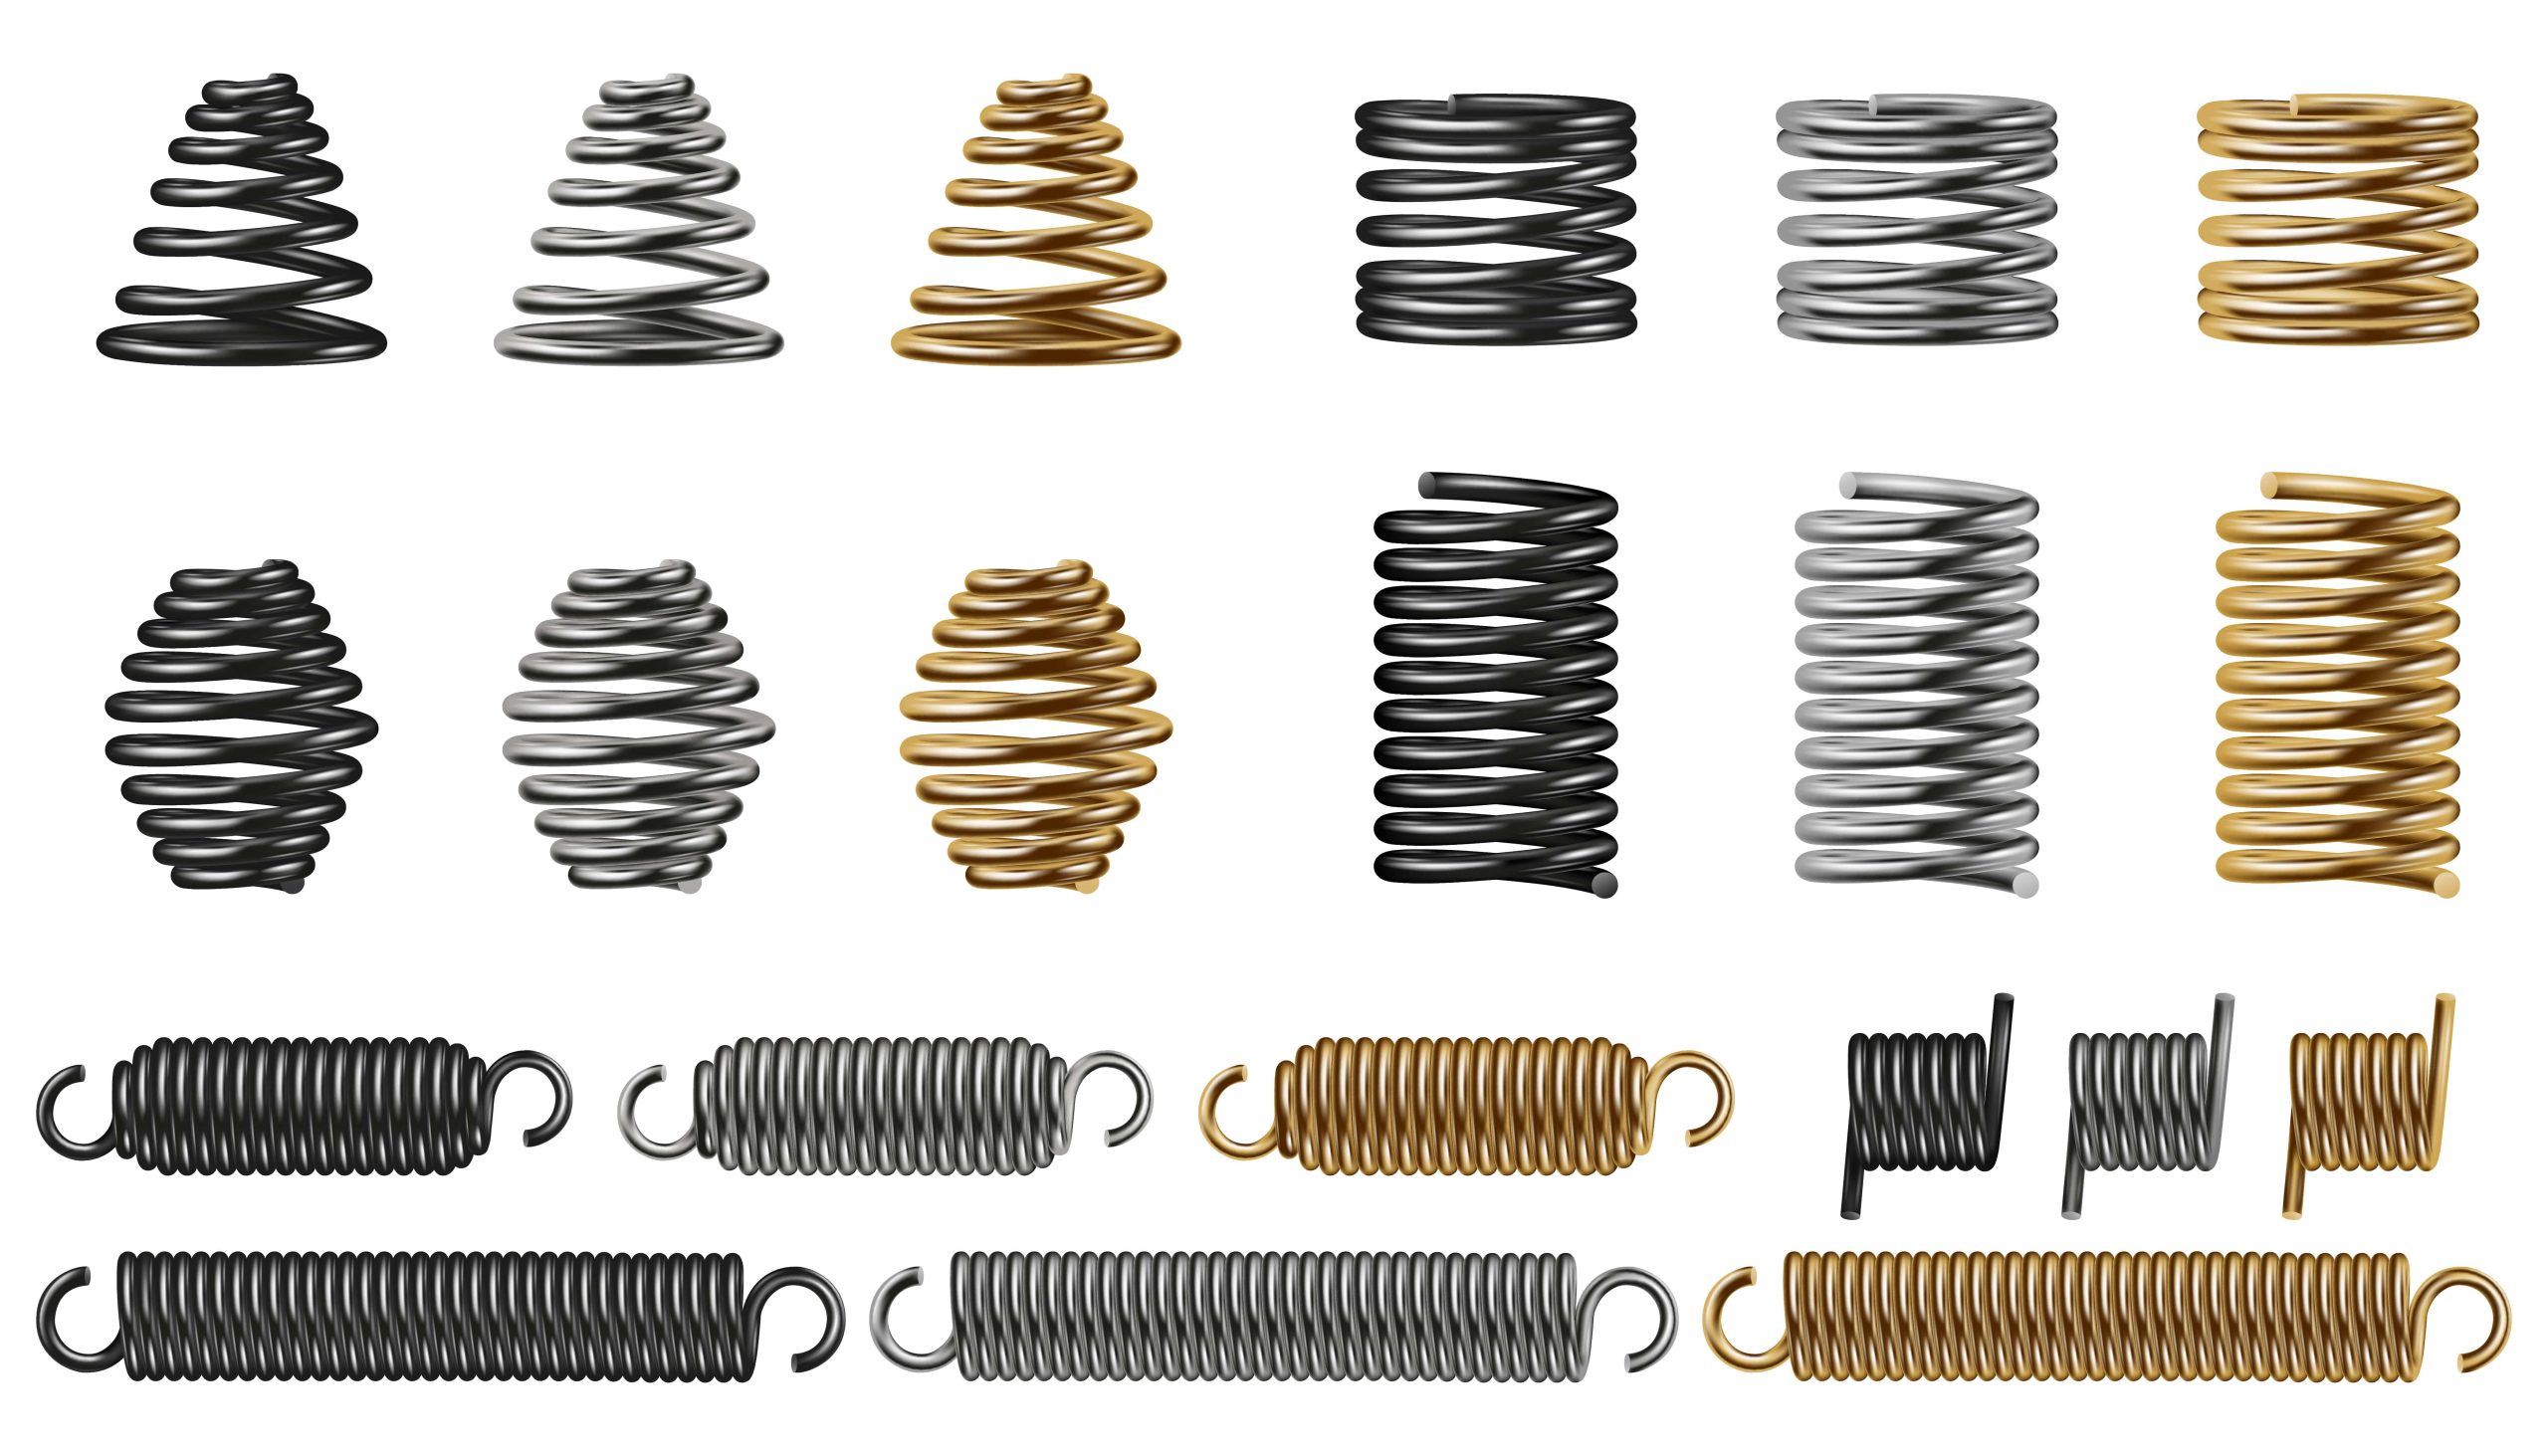 Why Choose GL Metal as Your Custom Compression Spring Manufacturer?